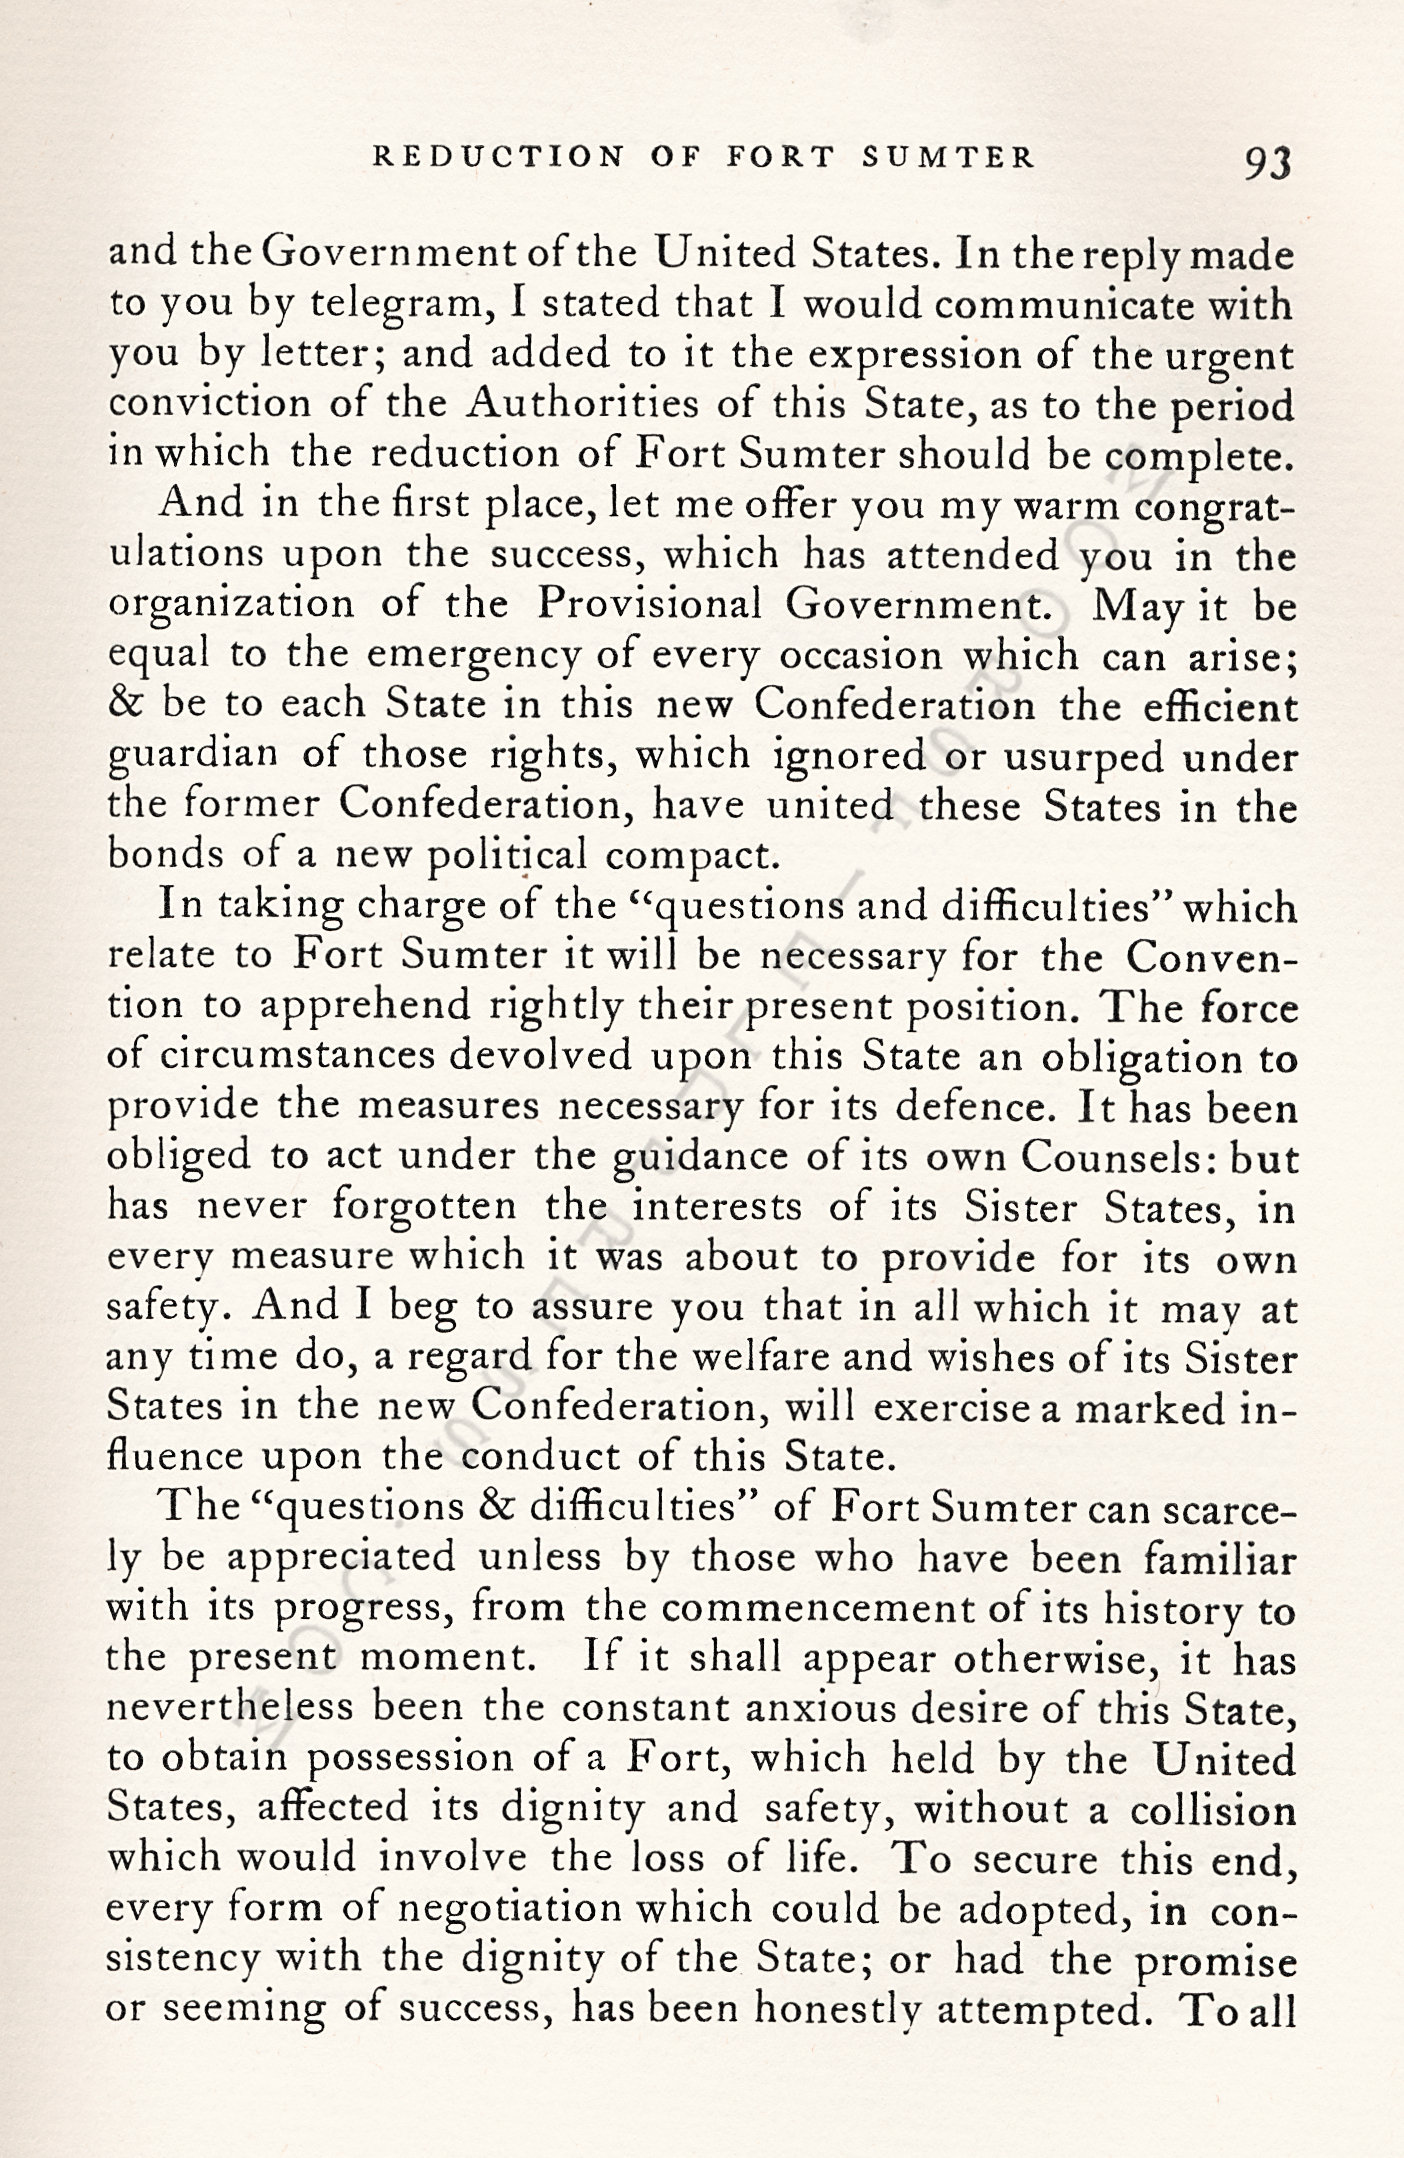 The
                      Reduction of Fort Sumter-Argument of Governor
                      Pickens of South Carolina